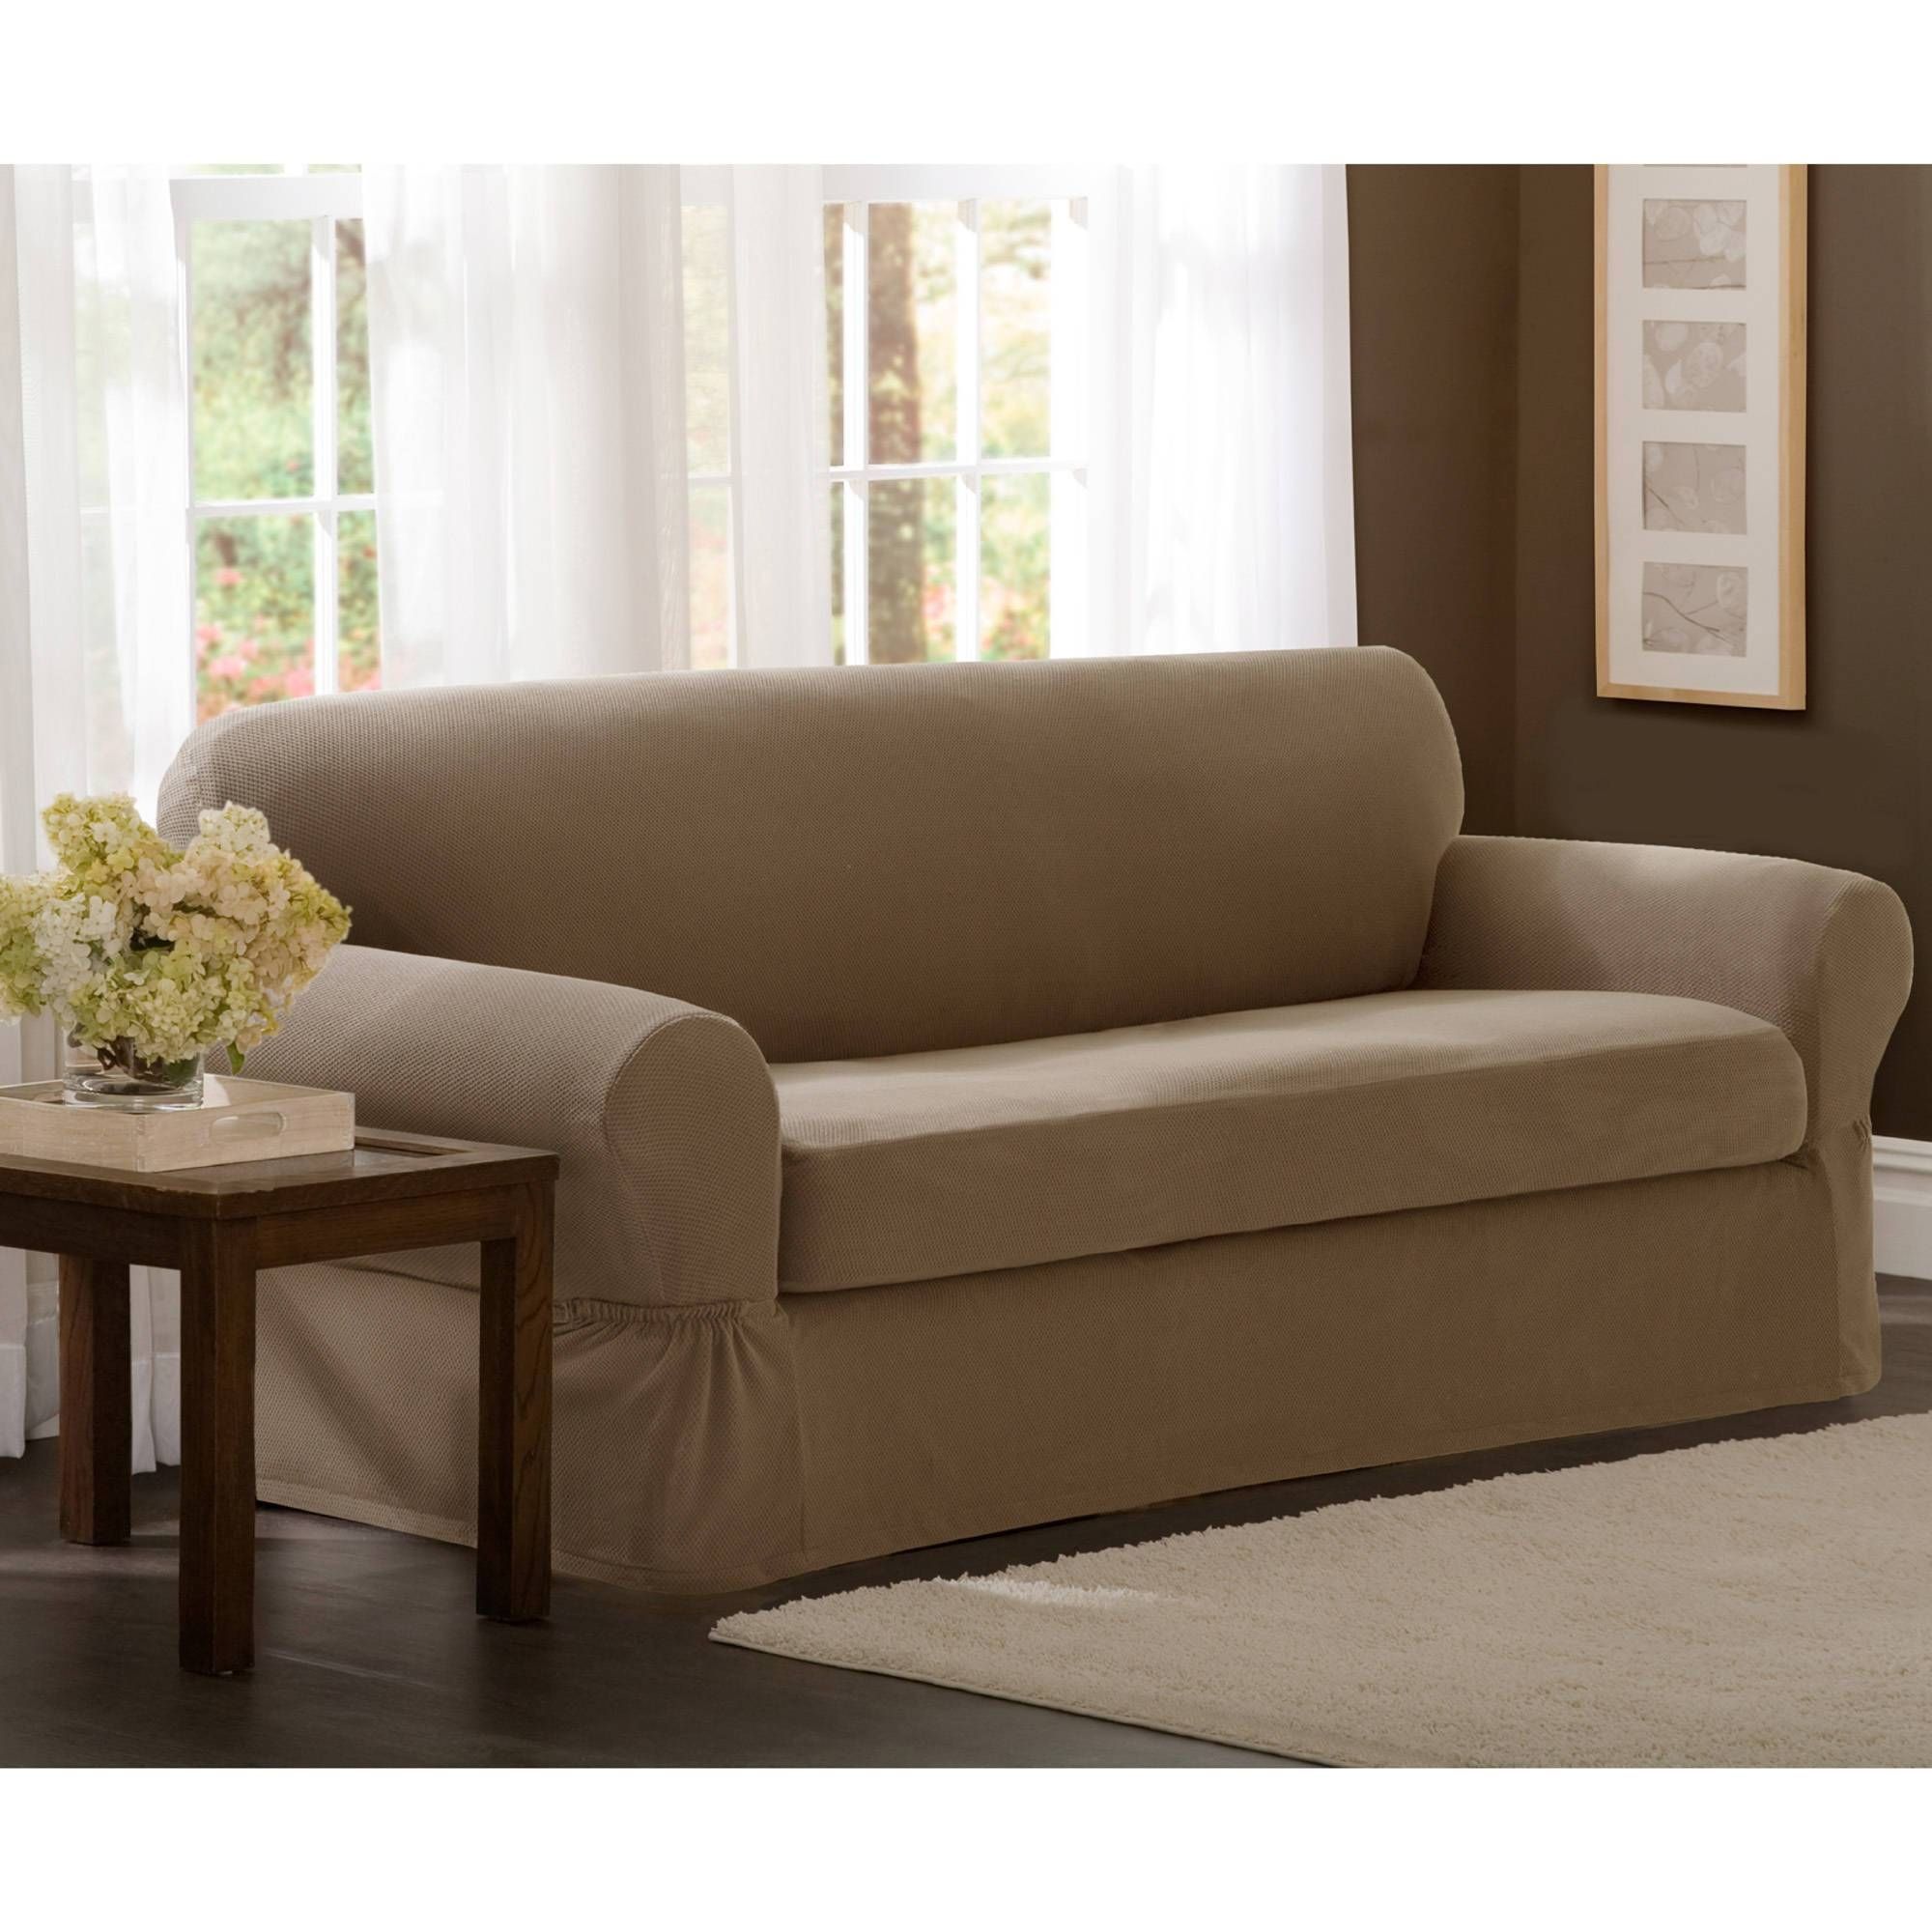 Sofas Center : Marys Custom Made Sofa Covers Contrast Piping Pertaining To Canvas Slipcover Sofas (View 6 of 15)